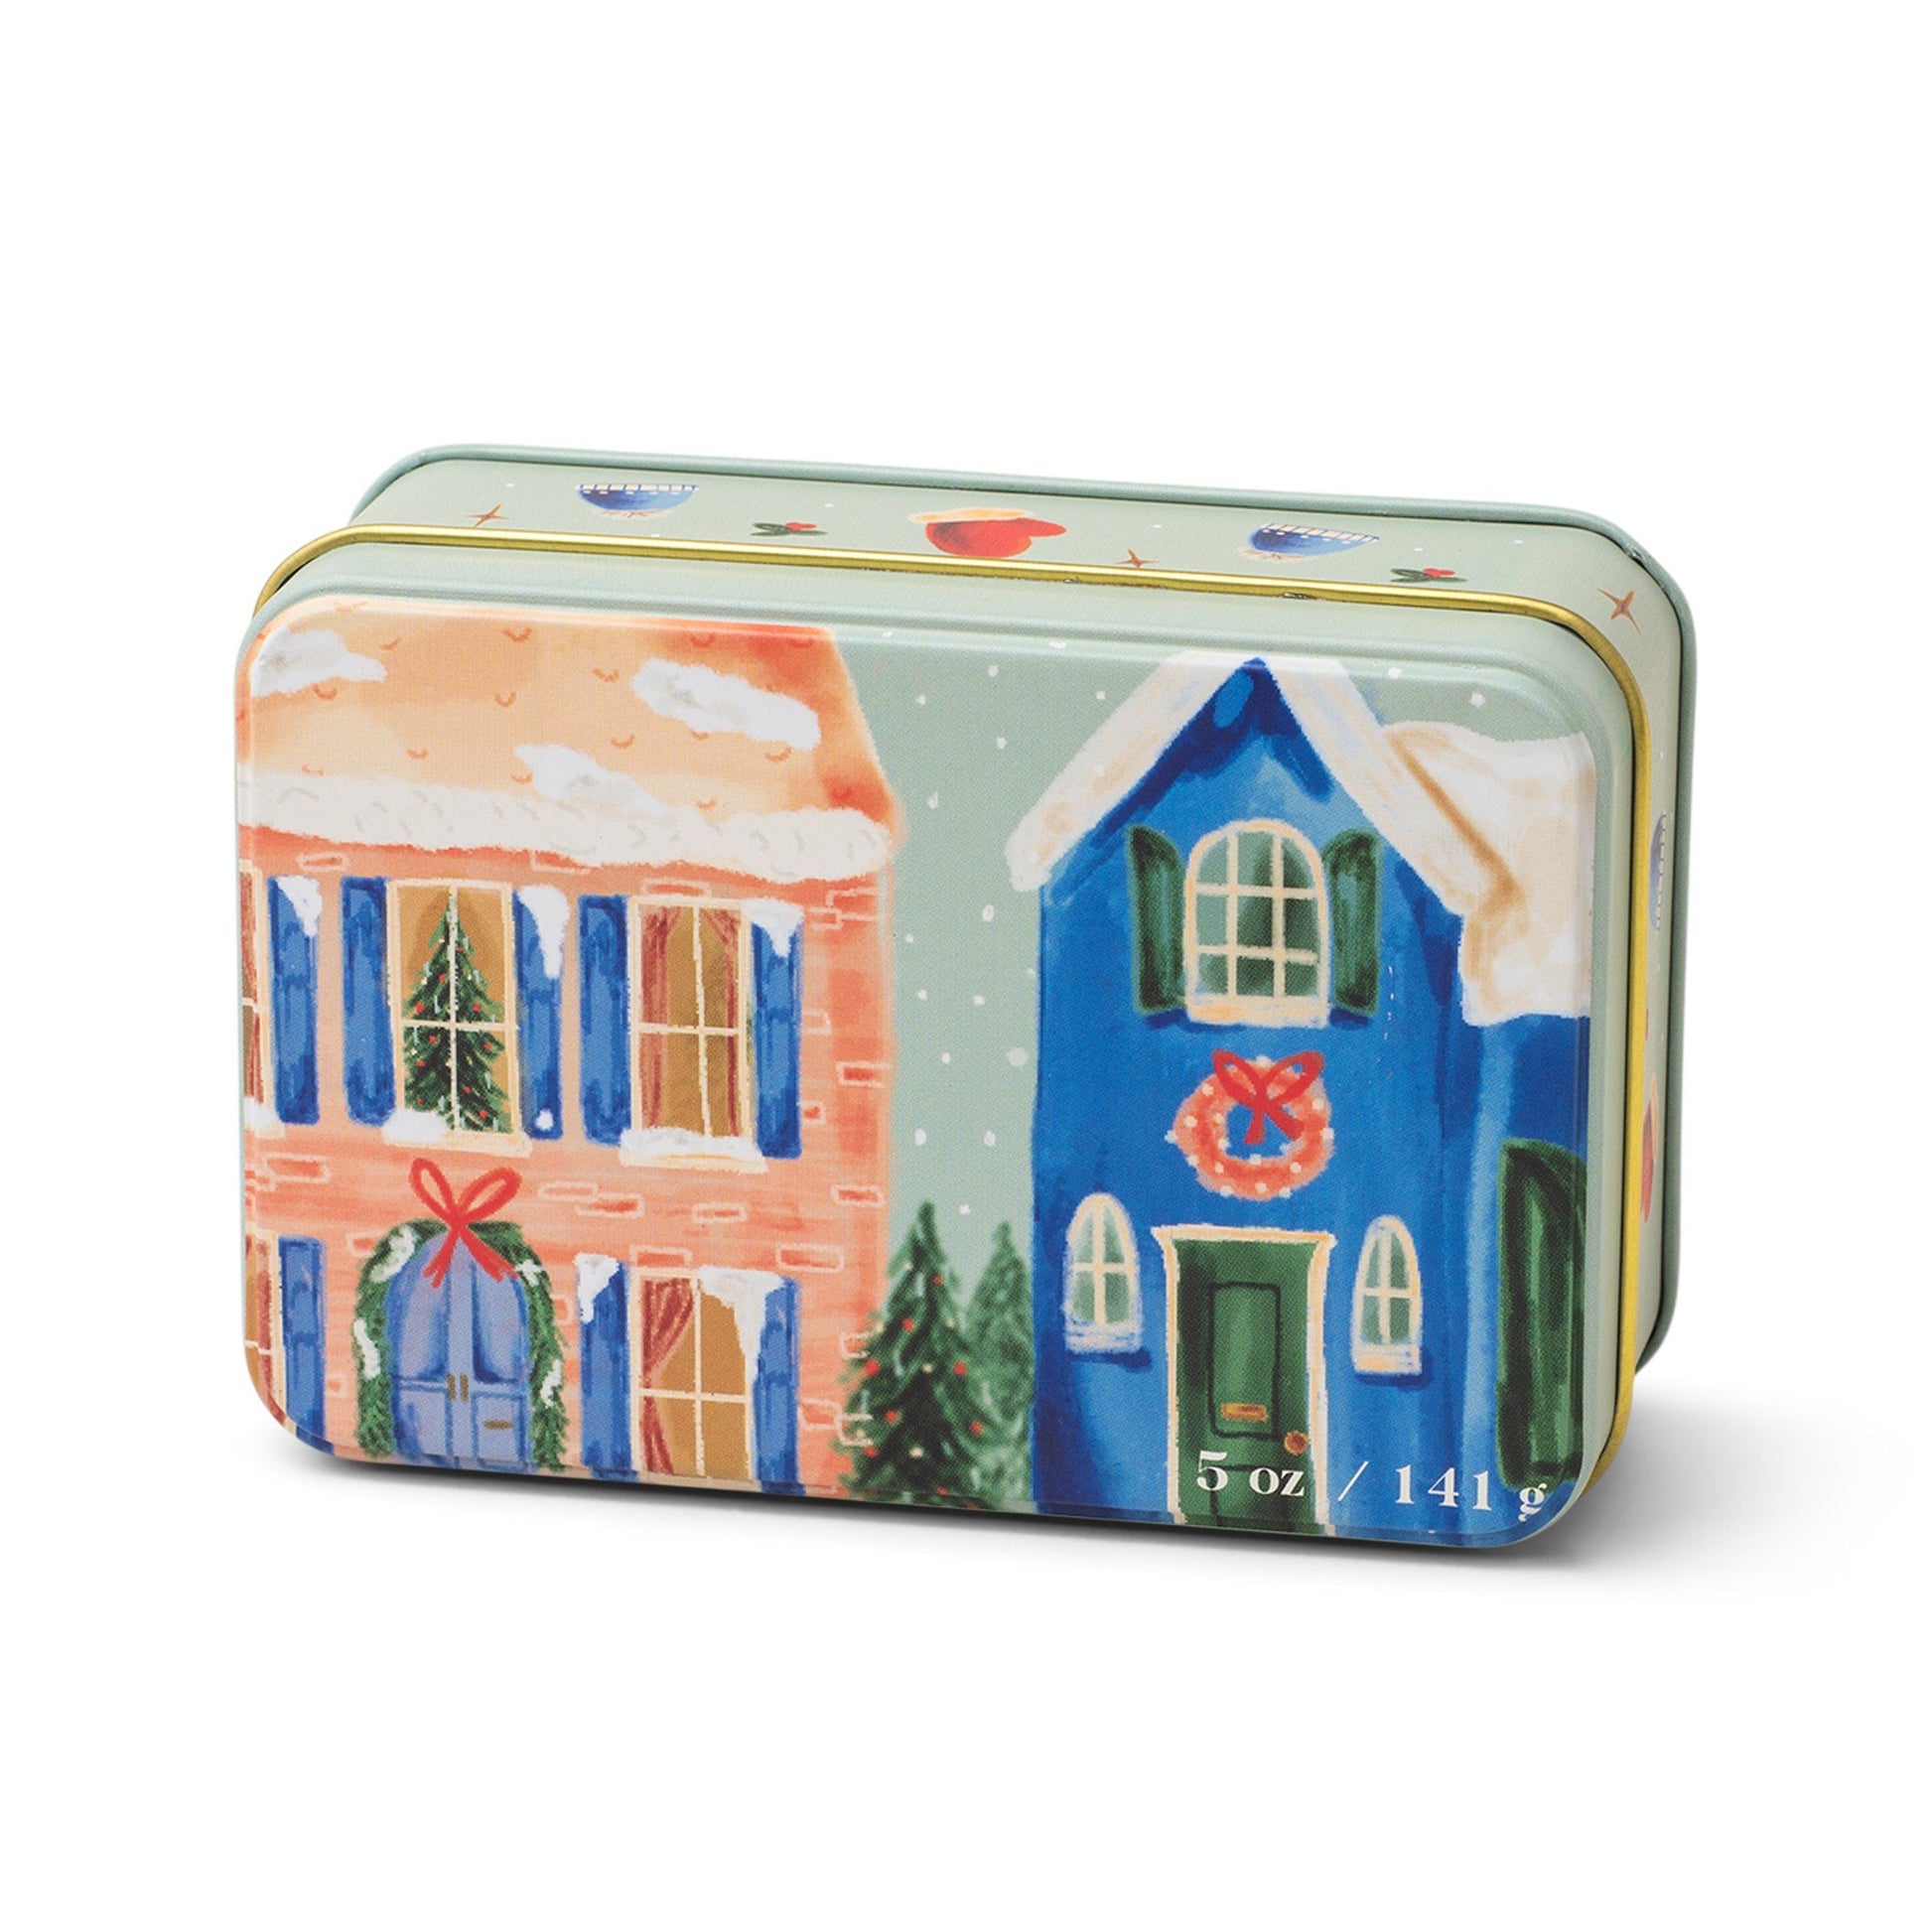 5 oz holiday tin with custom artwork; lid shows snow-covered houses decorated for the holidays